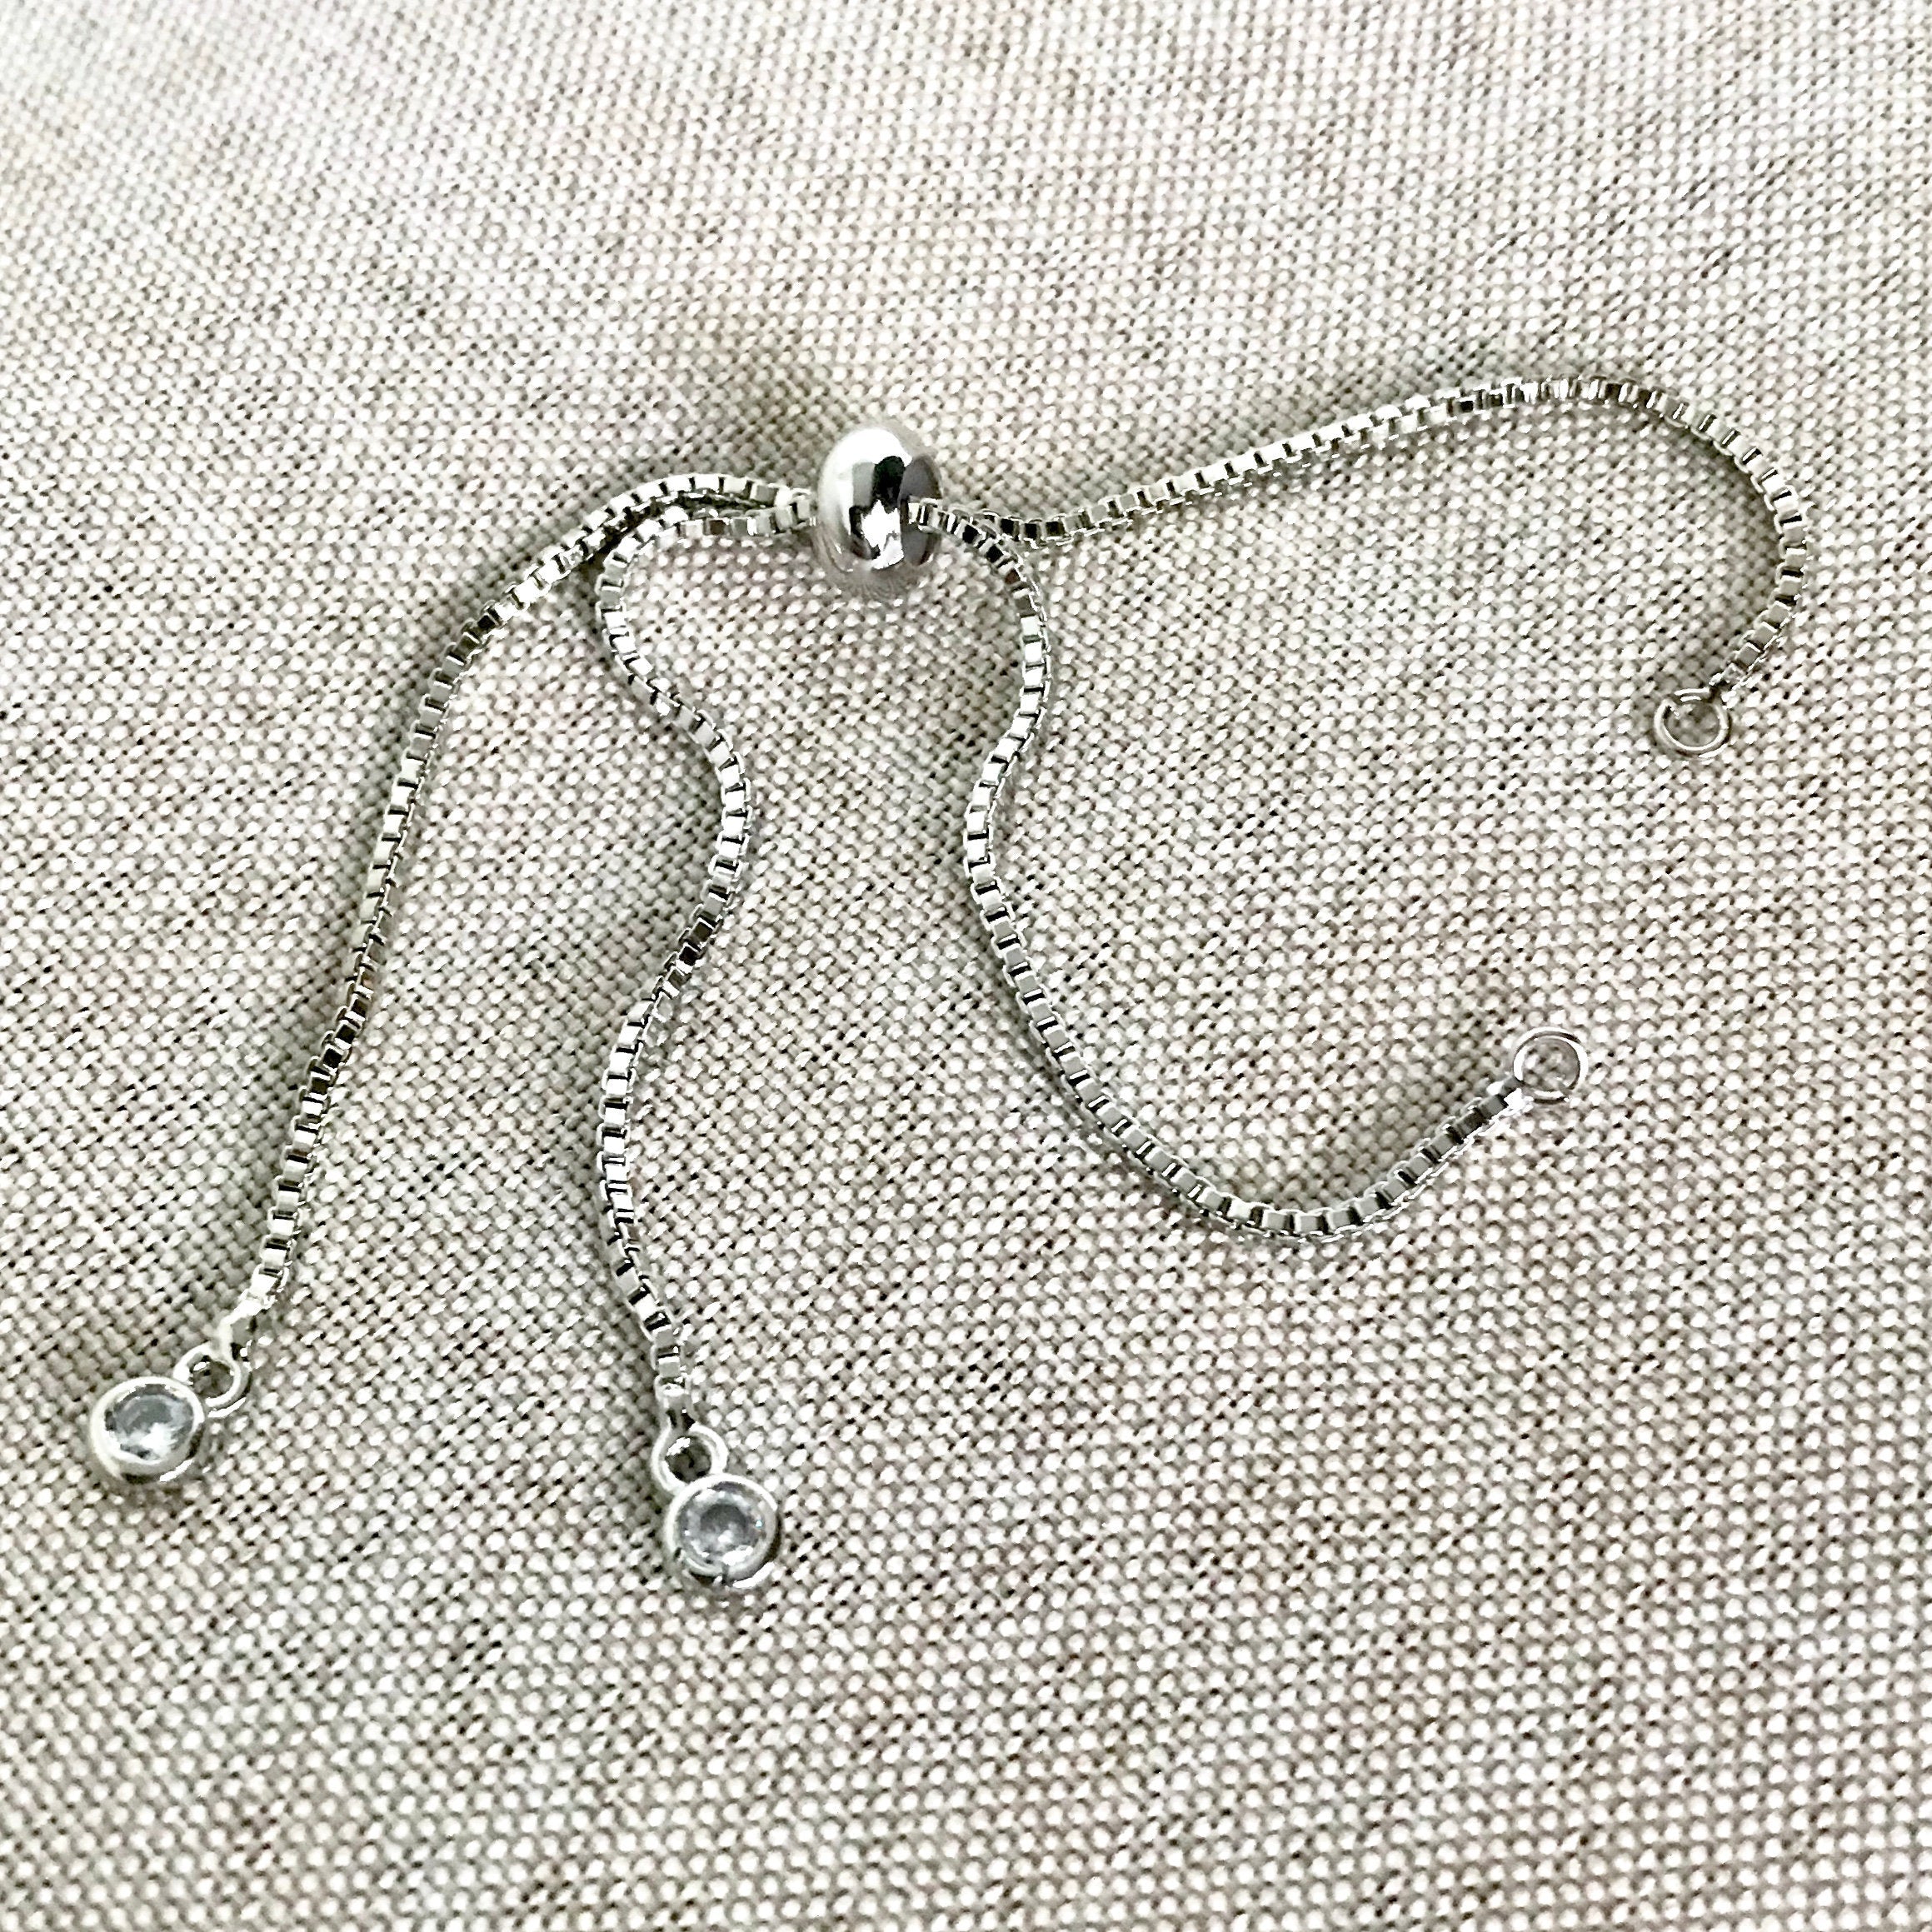 16 - 925 Sterling Silver Filled Necklace Chain - Dainty Fine - 16 - 16 inch - Lobster Claw Clasp - .925 Stamped - Cable Chain